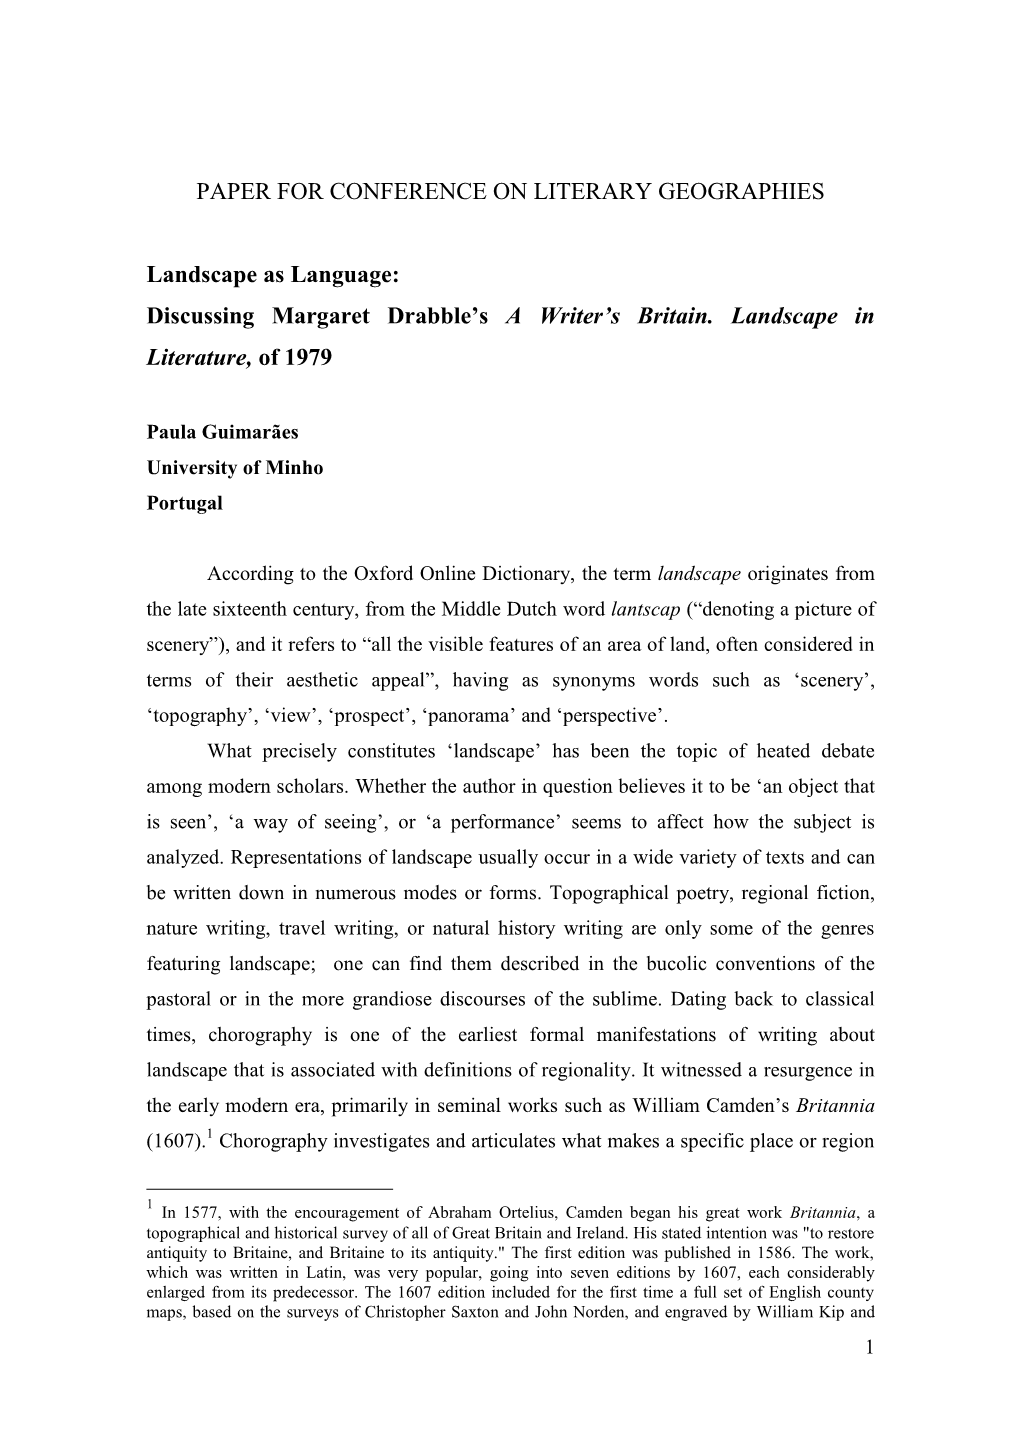 Paper for Conference on Literary Geographies